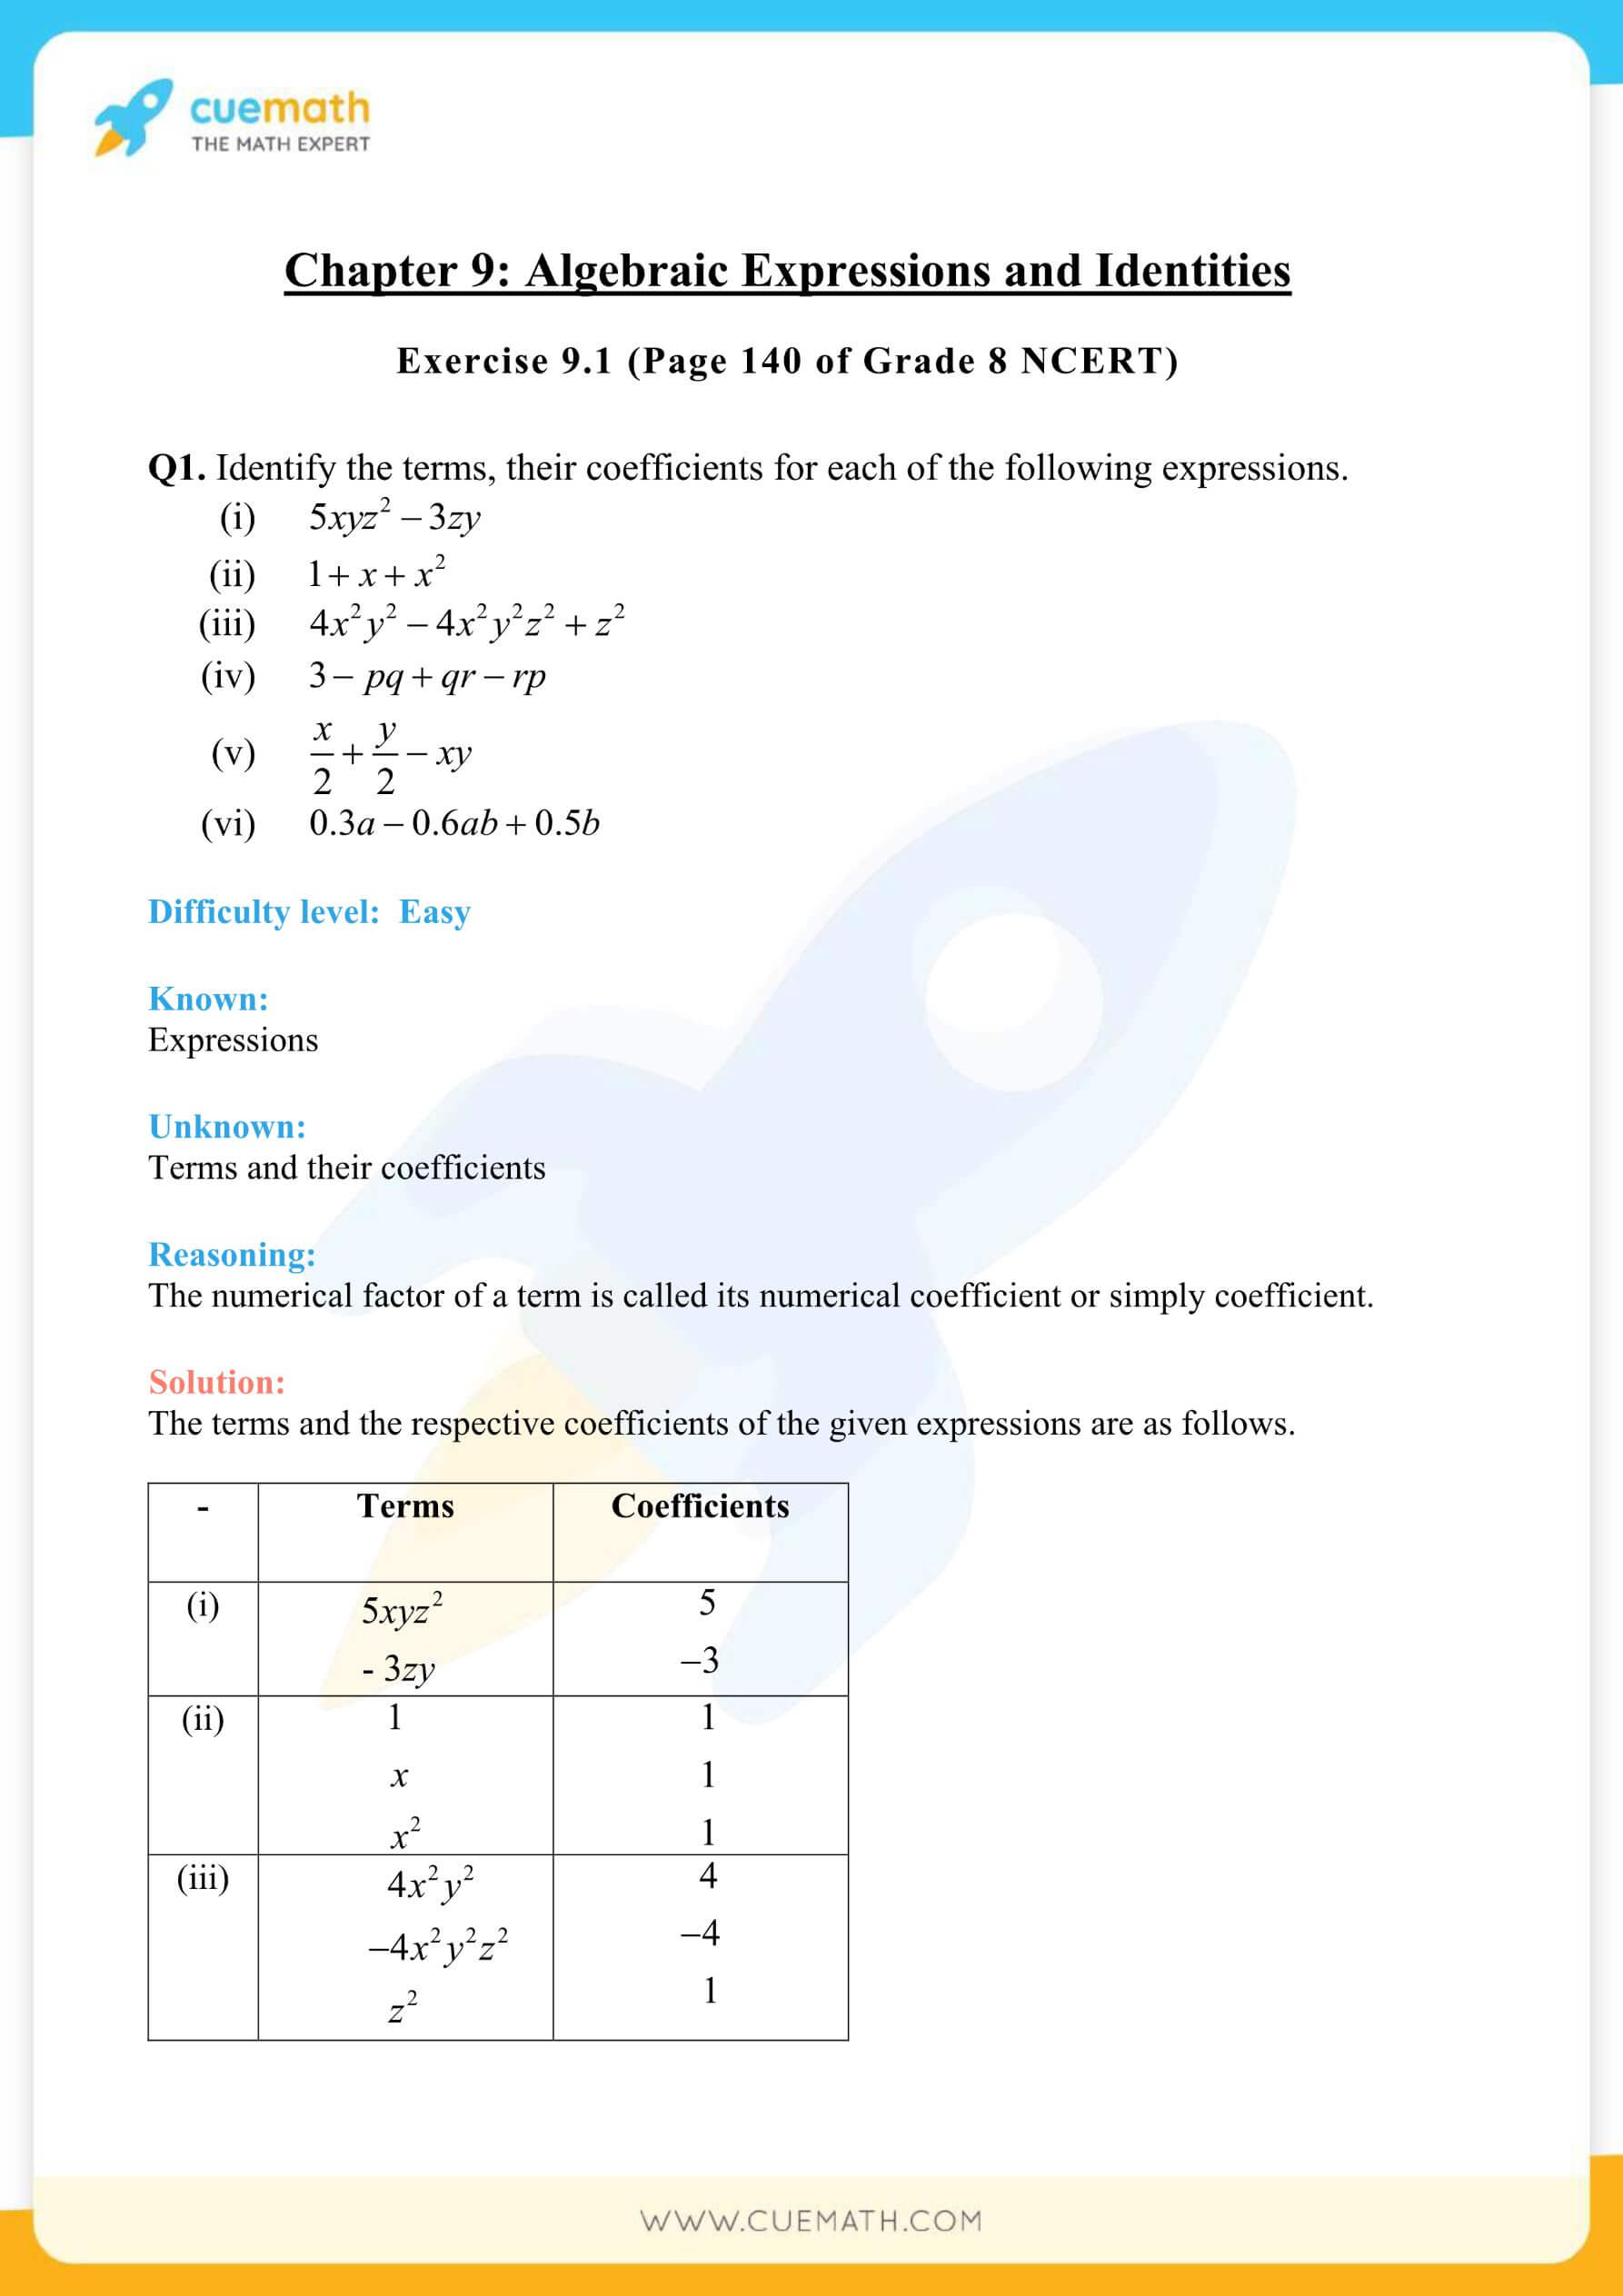 NCERT Solutions Class 8 Math Chapter 9 Algebraic Expressions And Identities 1